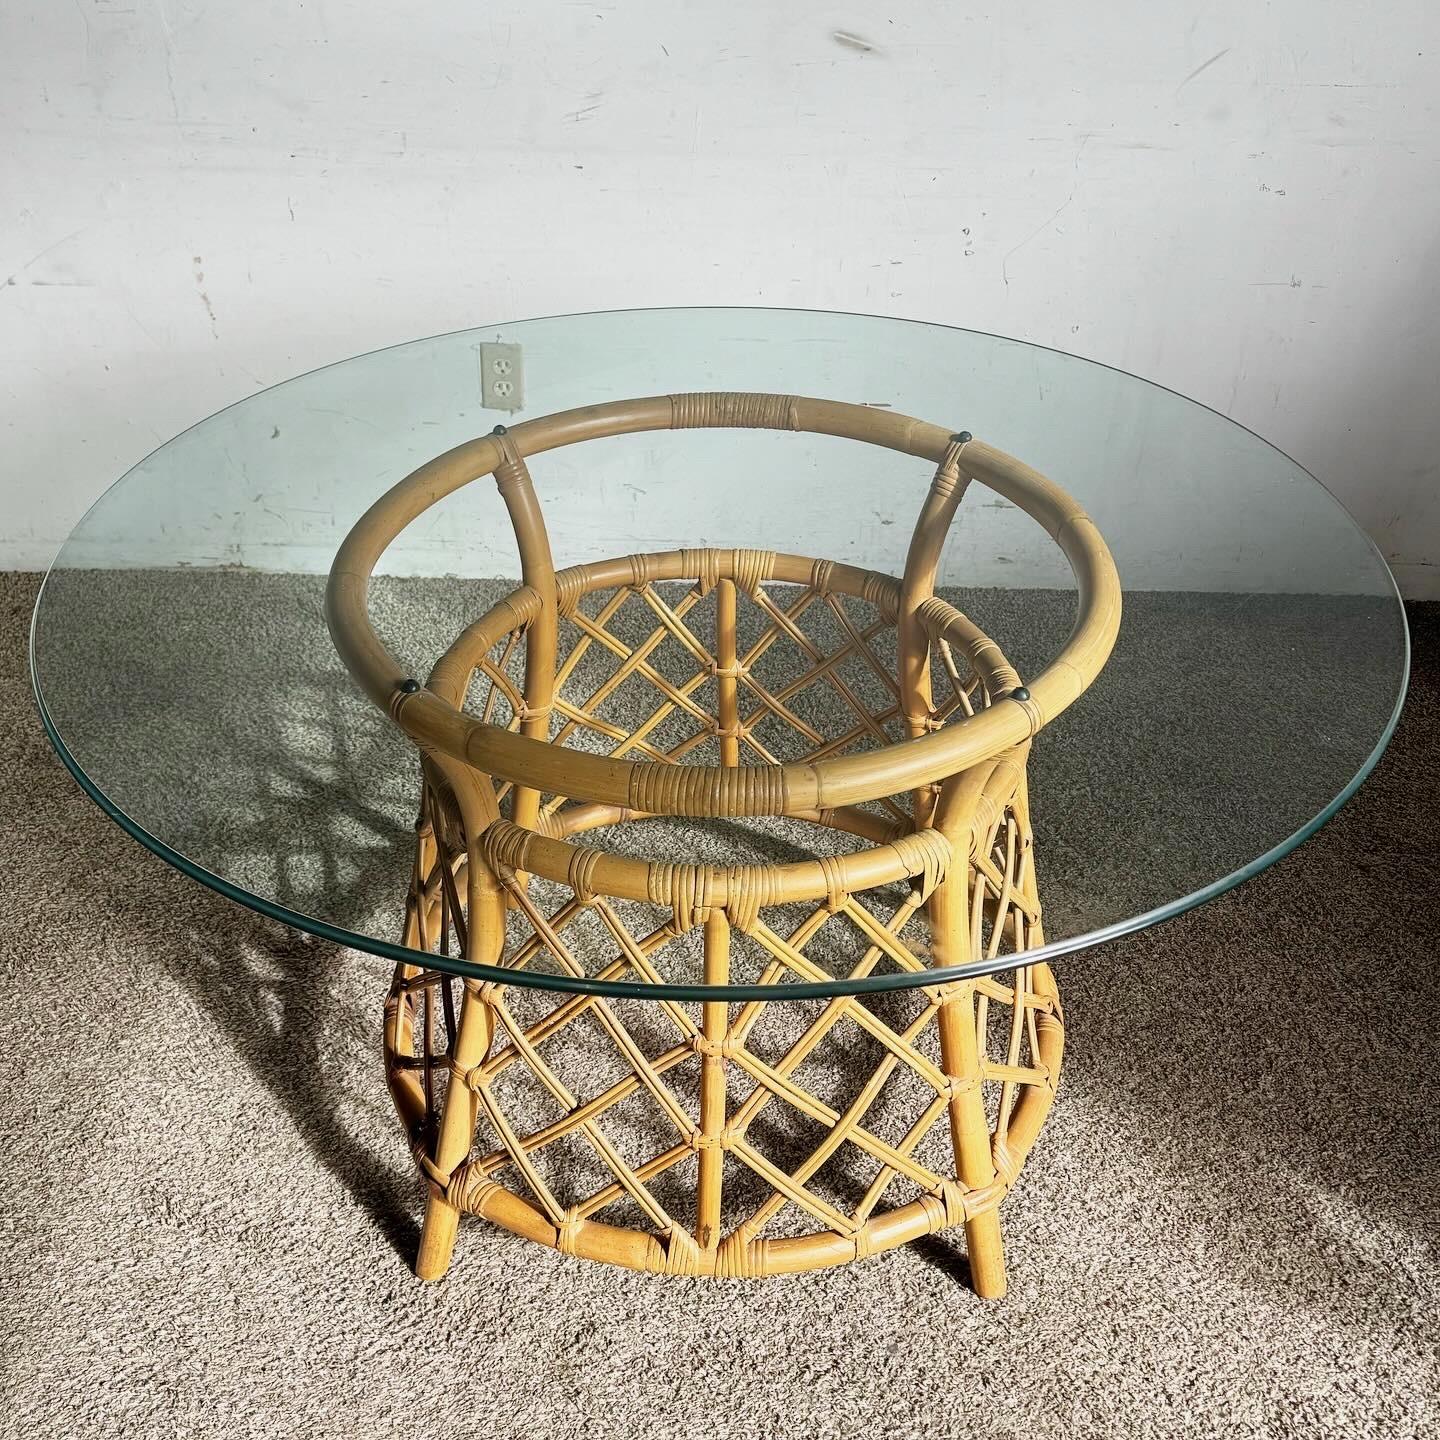 Elevate your dining experience with the Boho Chic Bamboo Rattan Circular Glass Top Dining Table by Ficks Reed. This table features a skillfully crafted bamboo and rattan base, paired with a durable circular glass top. Ideal for those who appreciate